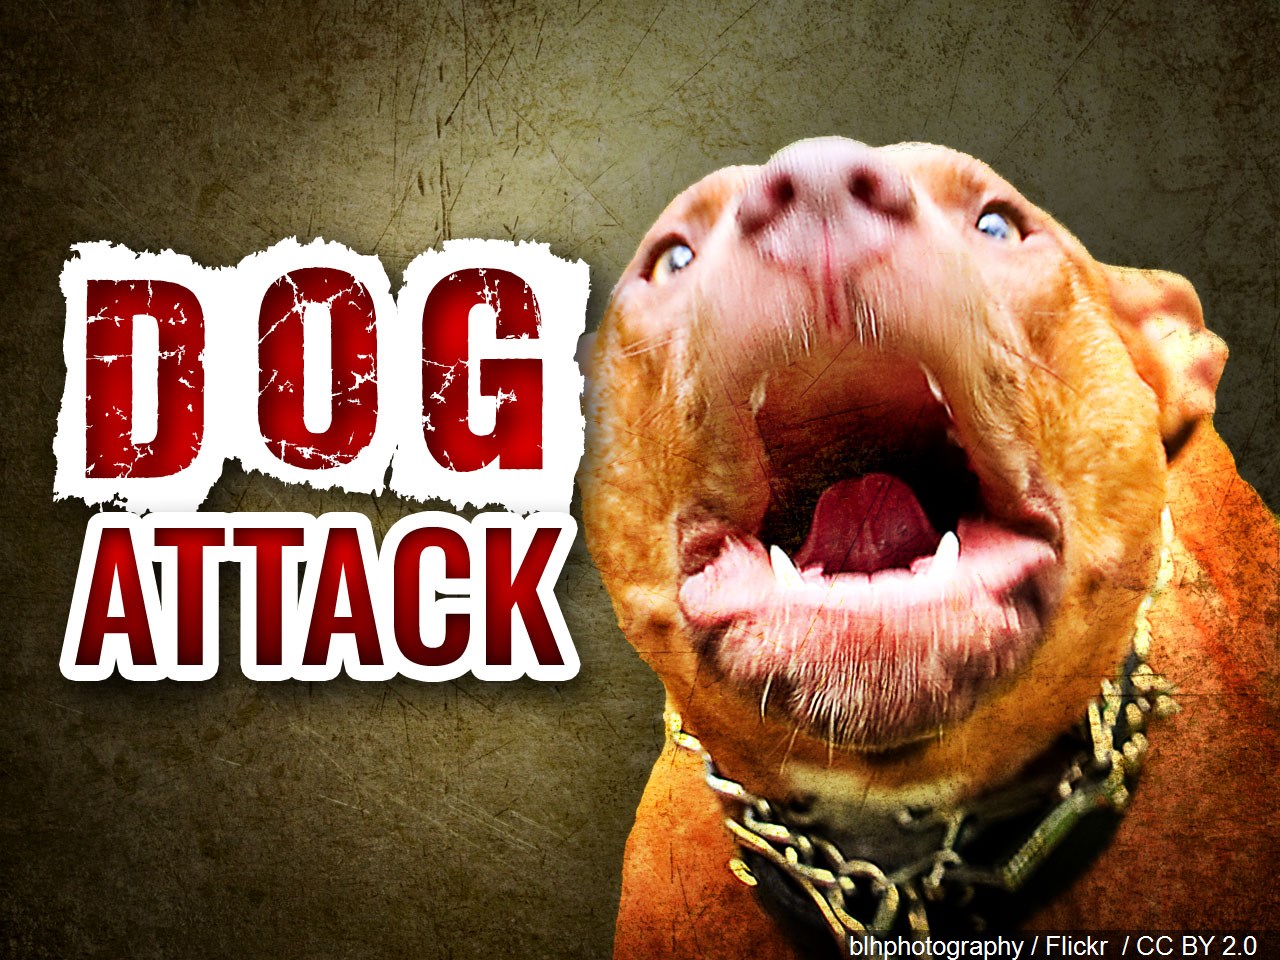 Elderly woman attacked by four dogs in Tuscaloosa, 2 dogs killed